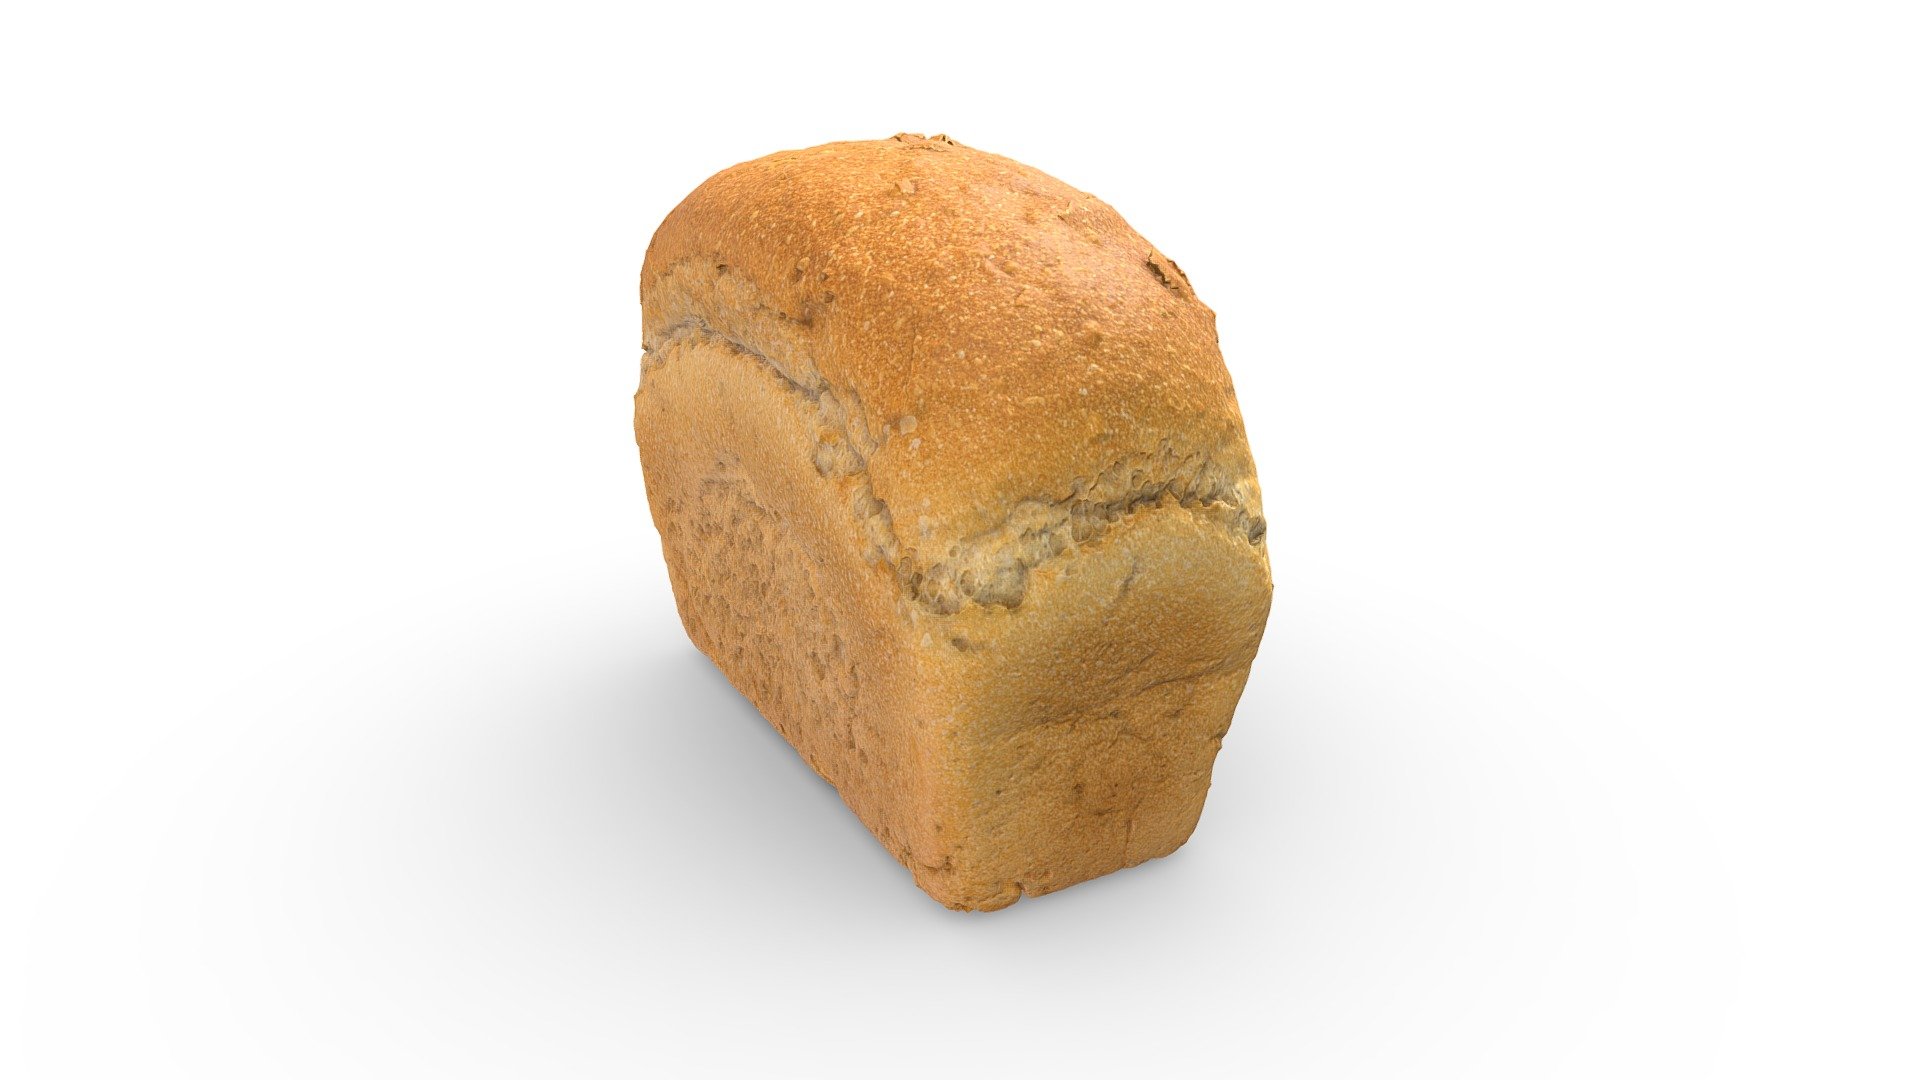 High-poly loaf of fresh bread photogrammetry scan. PBR texture maps 4096x4096 px. resolution for metallic or specular workflow. Scan from real food, high-poly 3D model, 4K resolution textures.

Additional file contains source PNG &amp; JPEG texture maps and Low-poly 3d model version 3d model